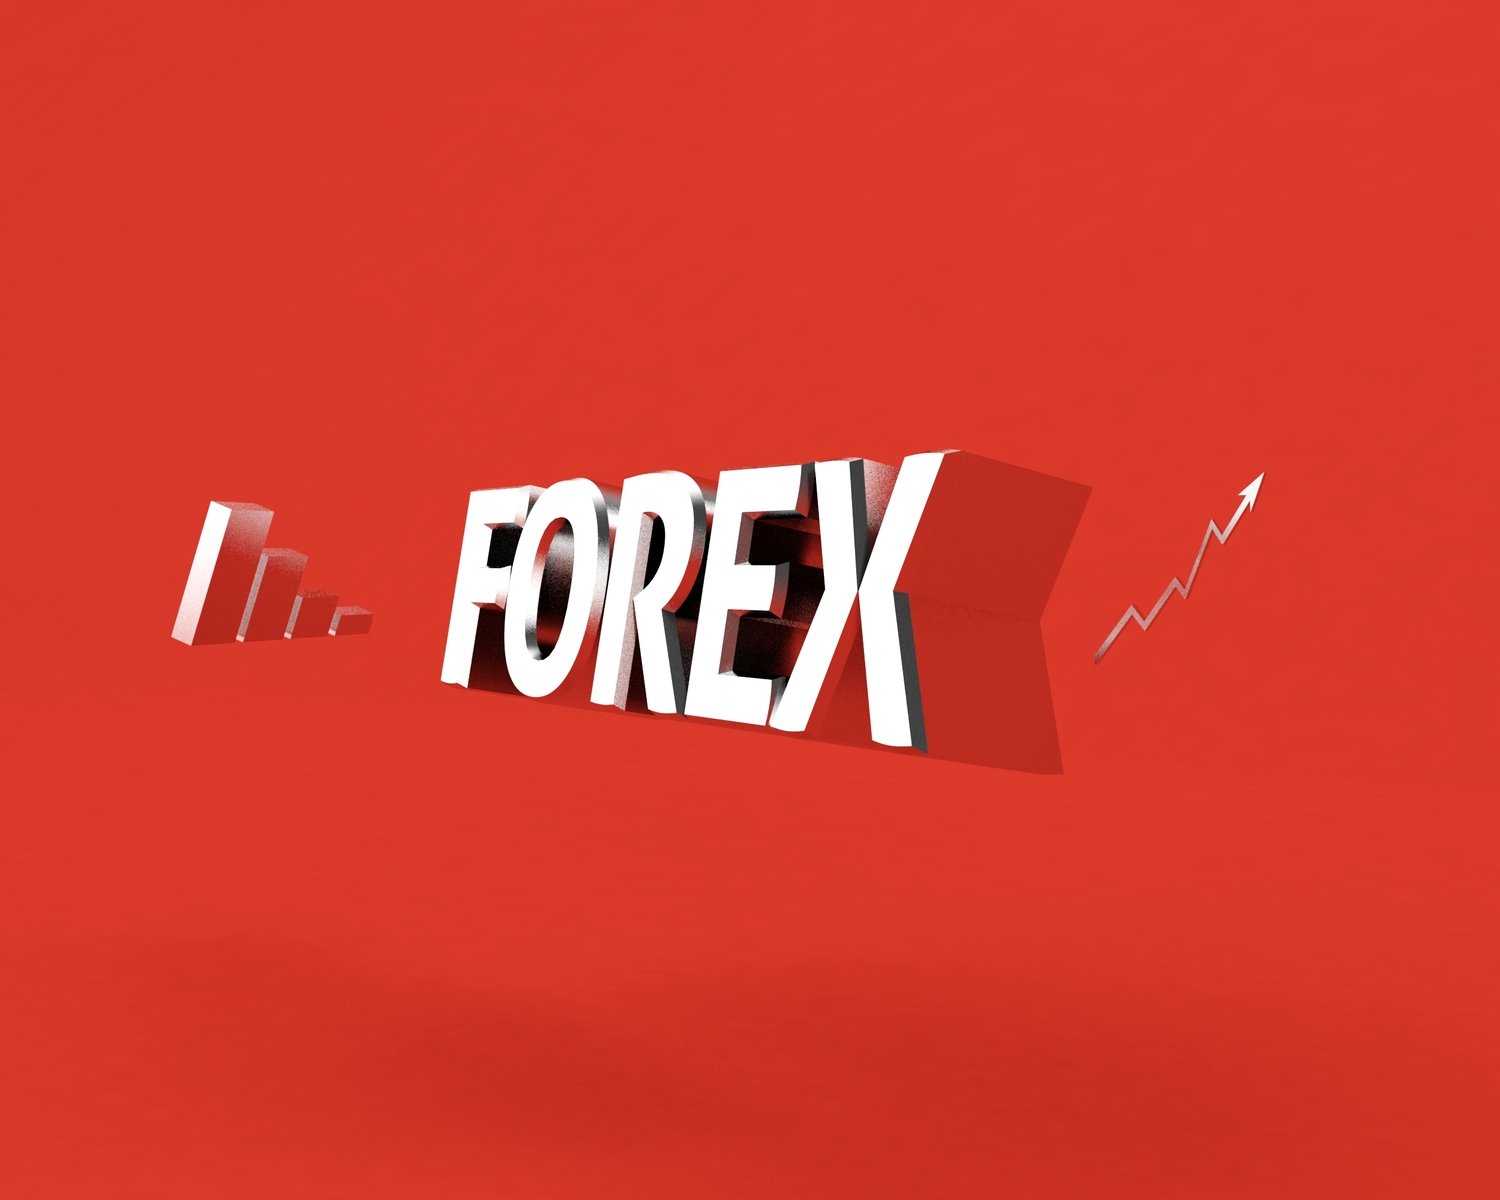 i forex 3d animation on red with arrows